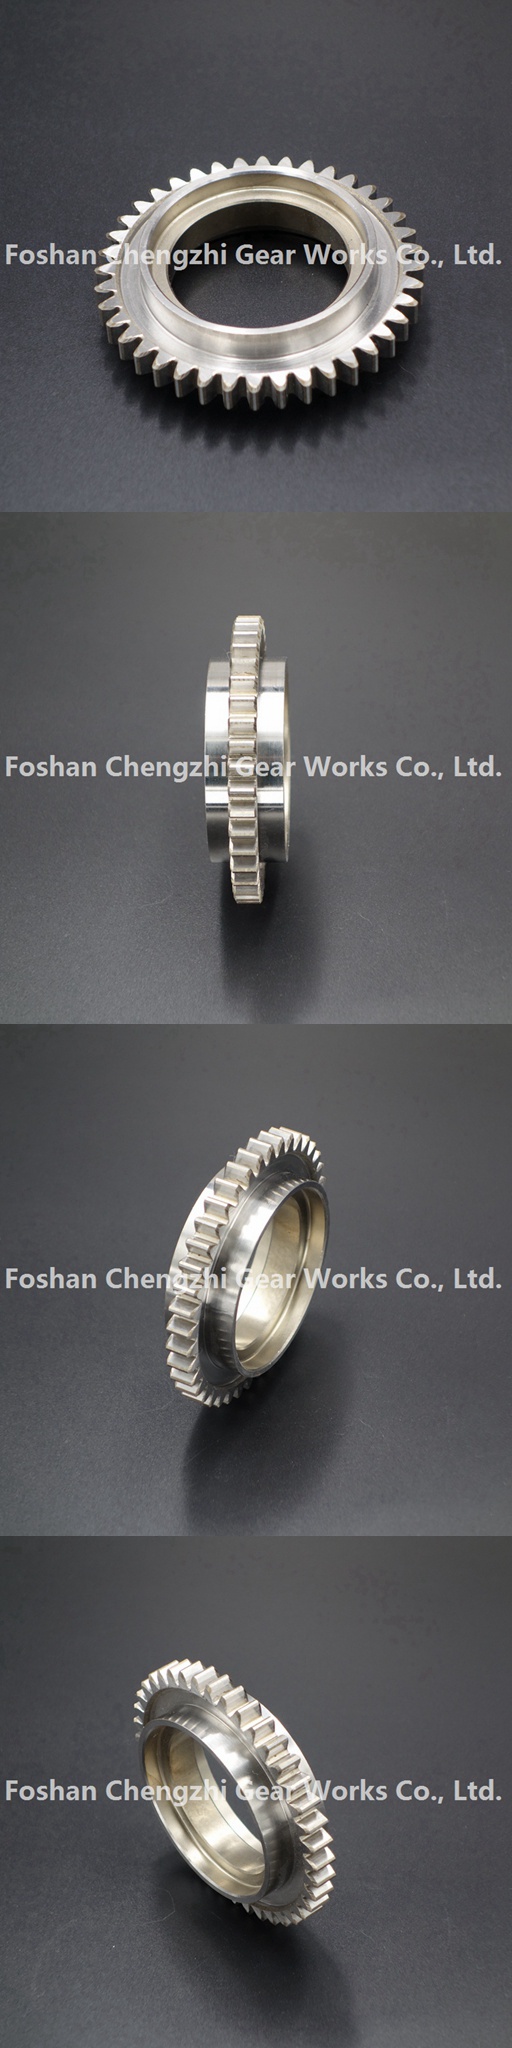 Customized Transmission Gear Nonstandard Gear for Various Machinery